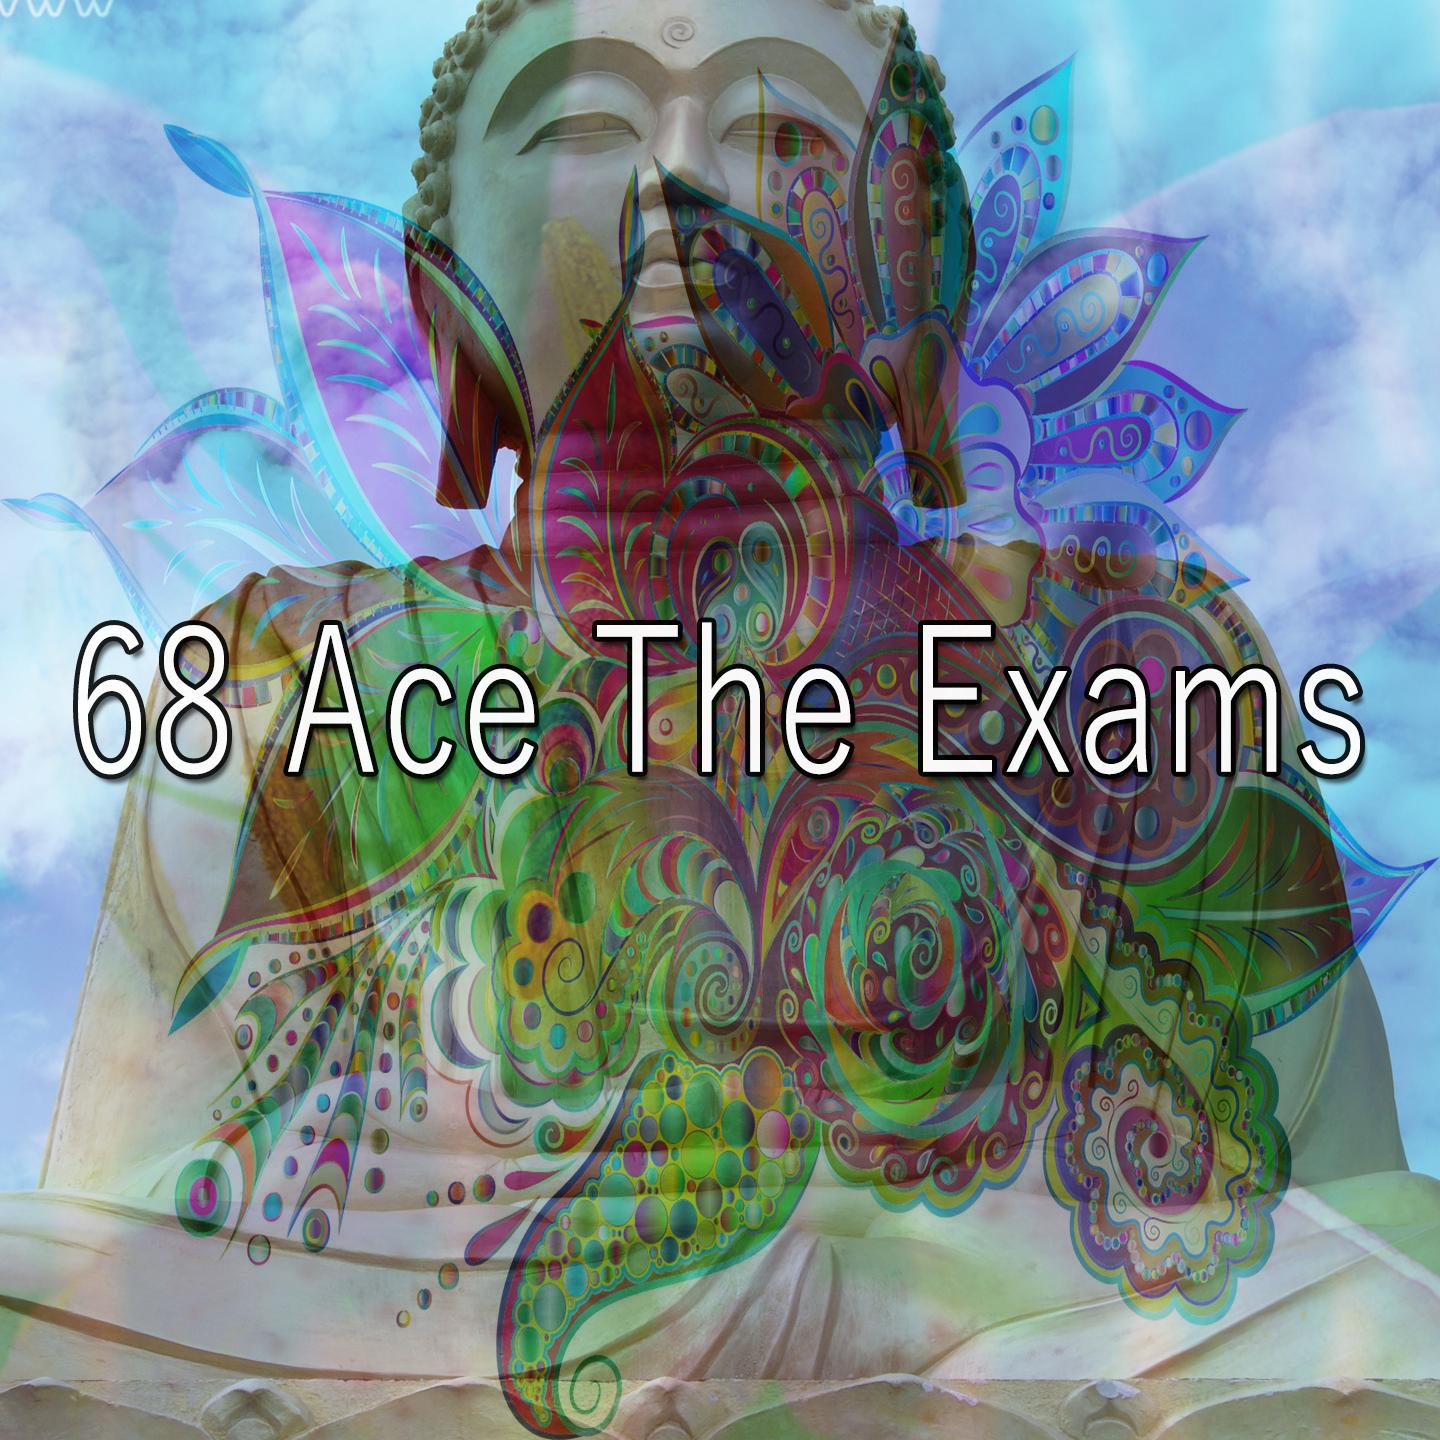 68 Ace the Exams